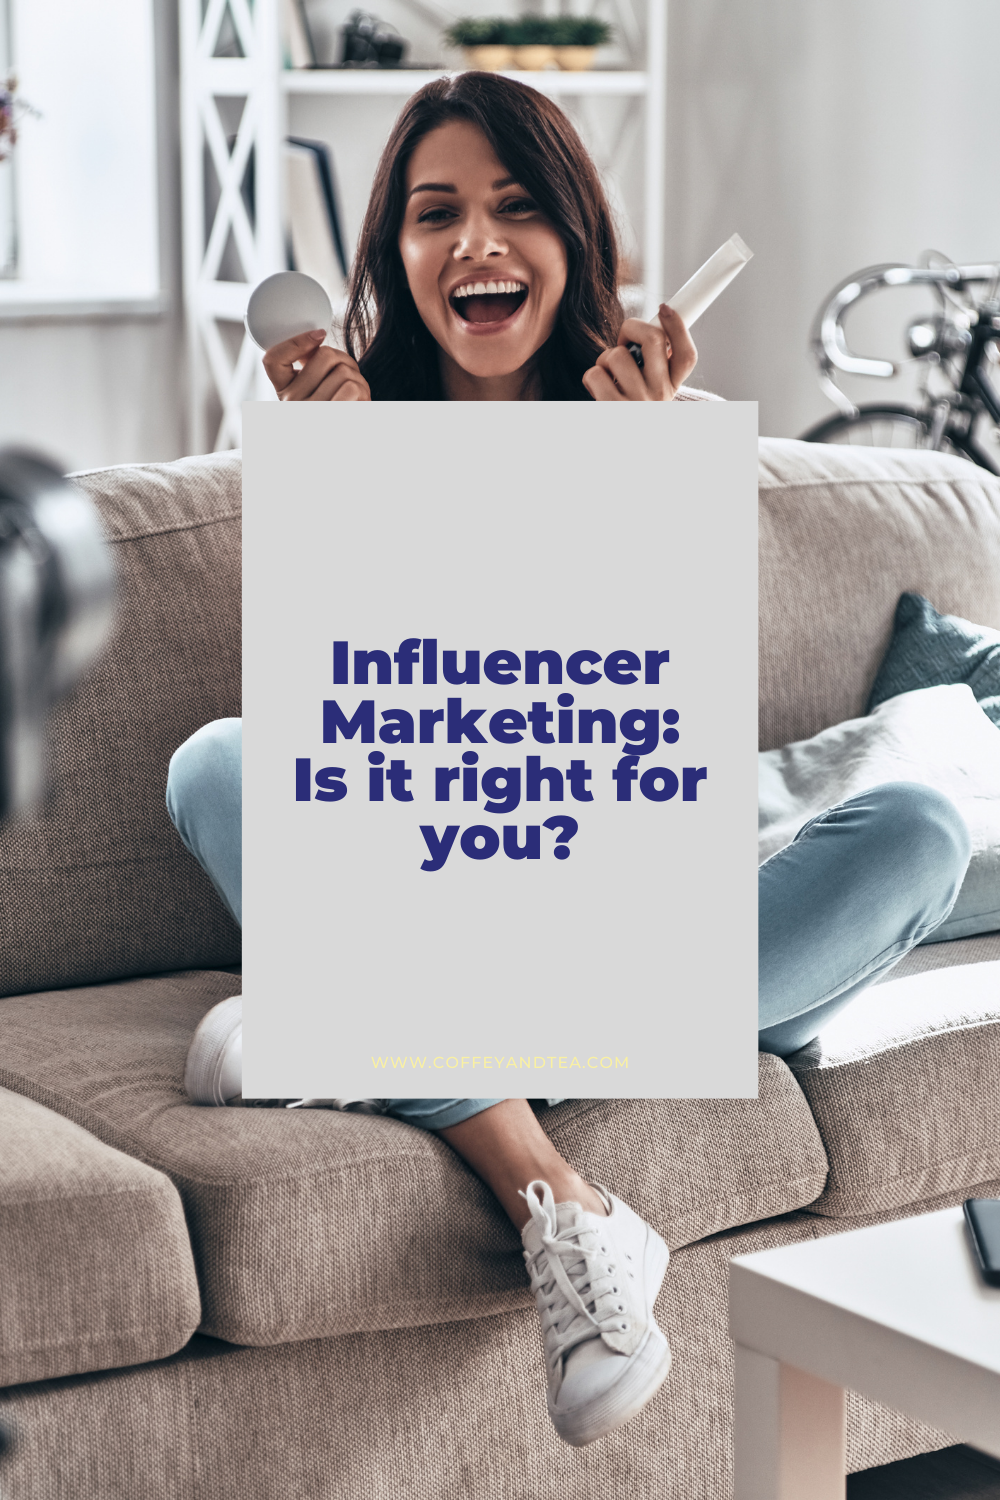 Influencer marketing: is it right for you?